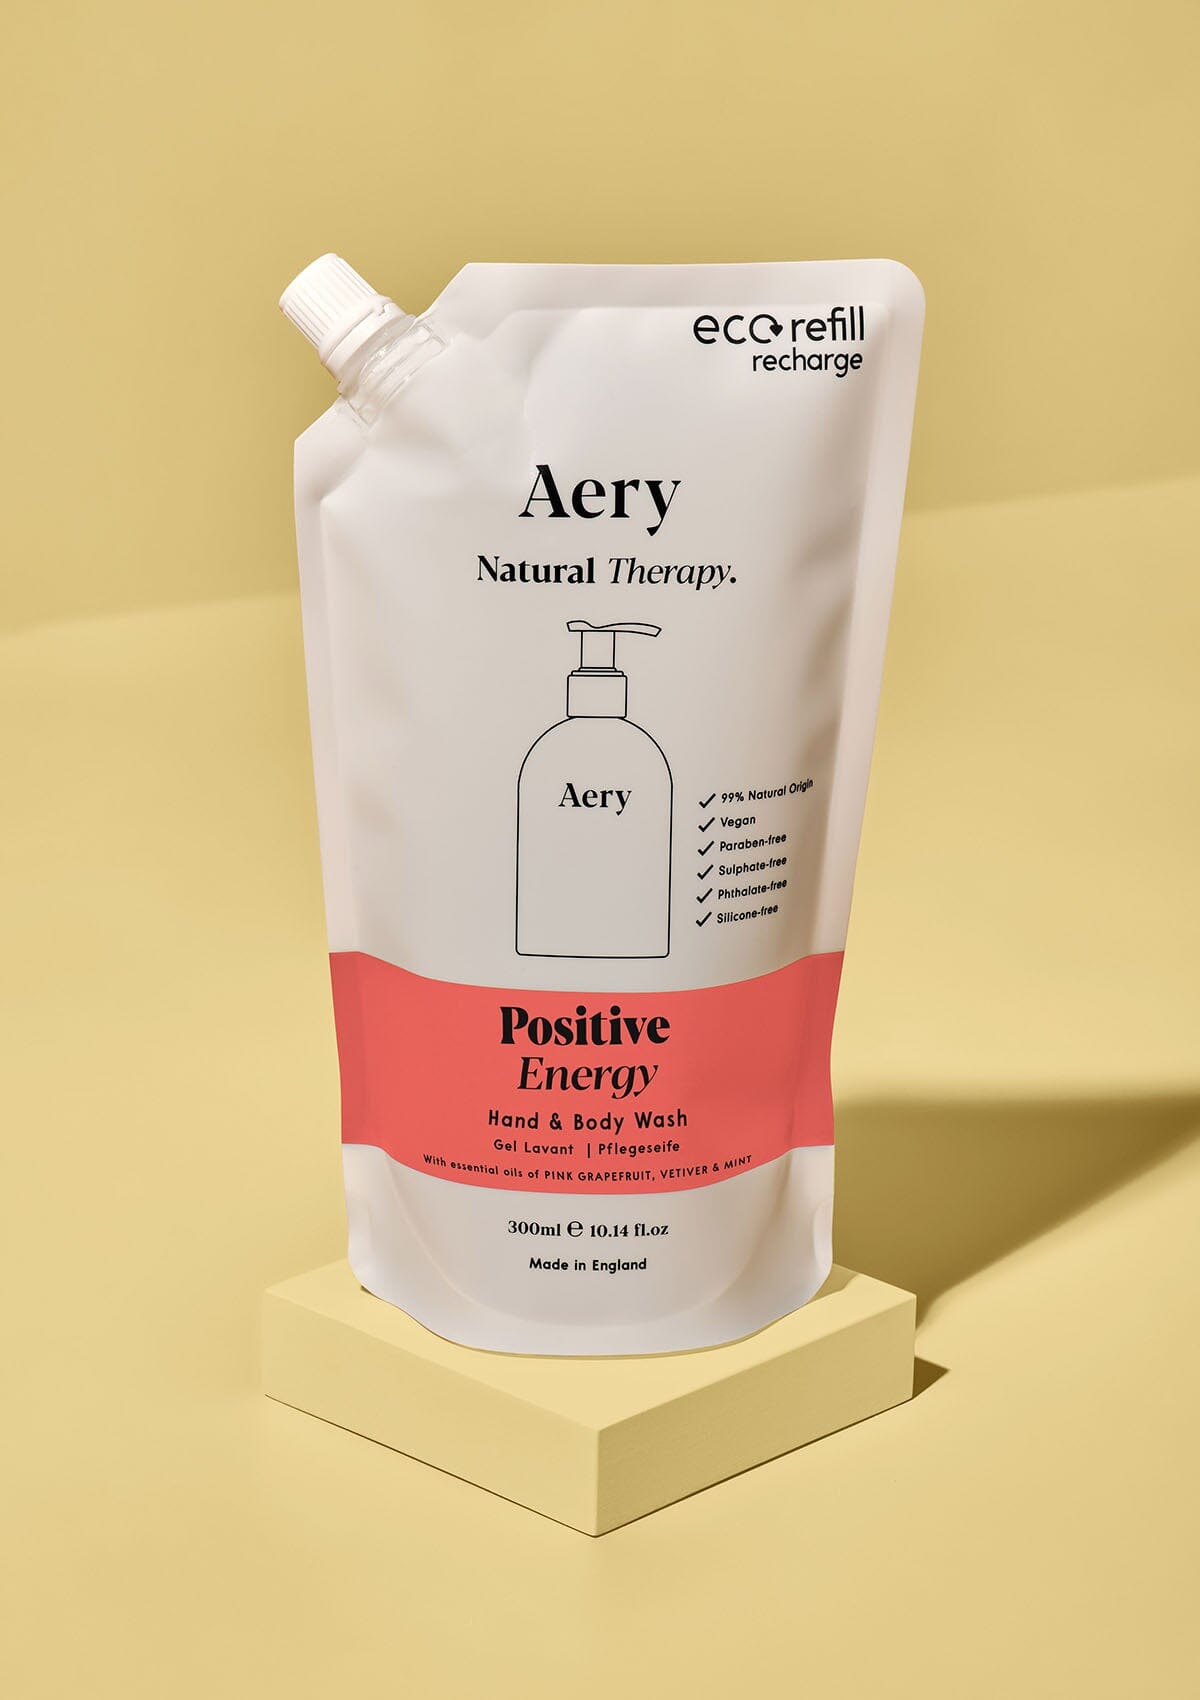 Red Positive Energy hand and body wash refill pouch by aery on yellow background 